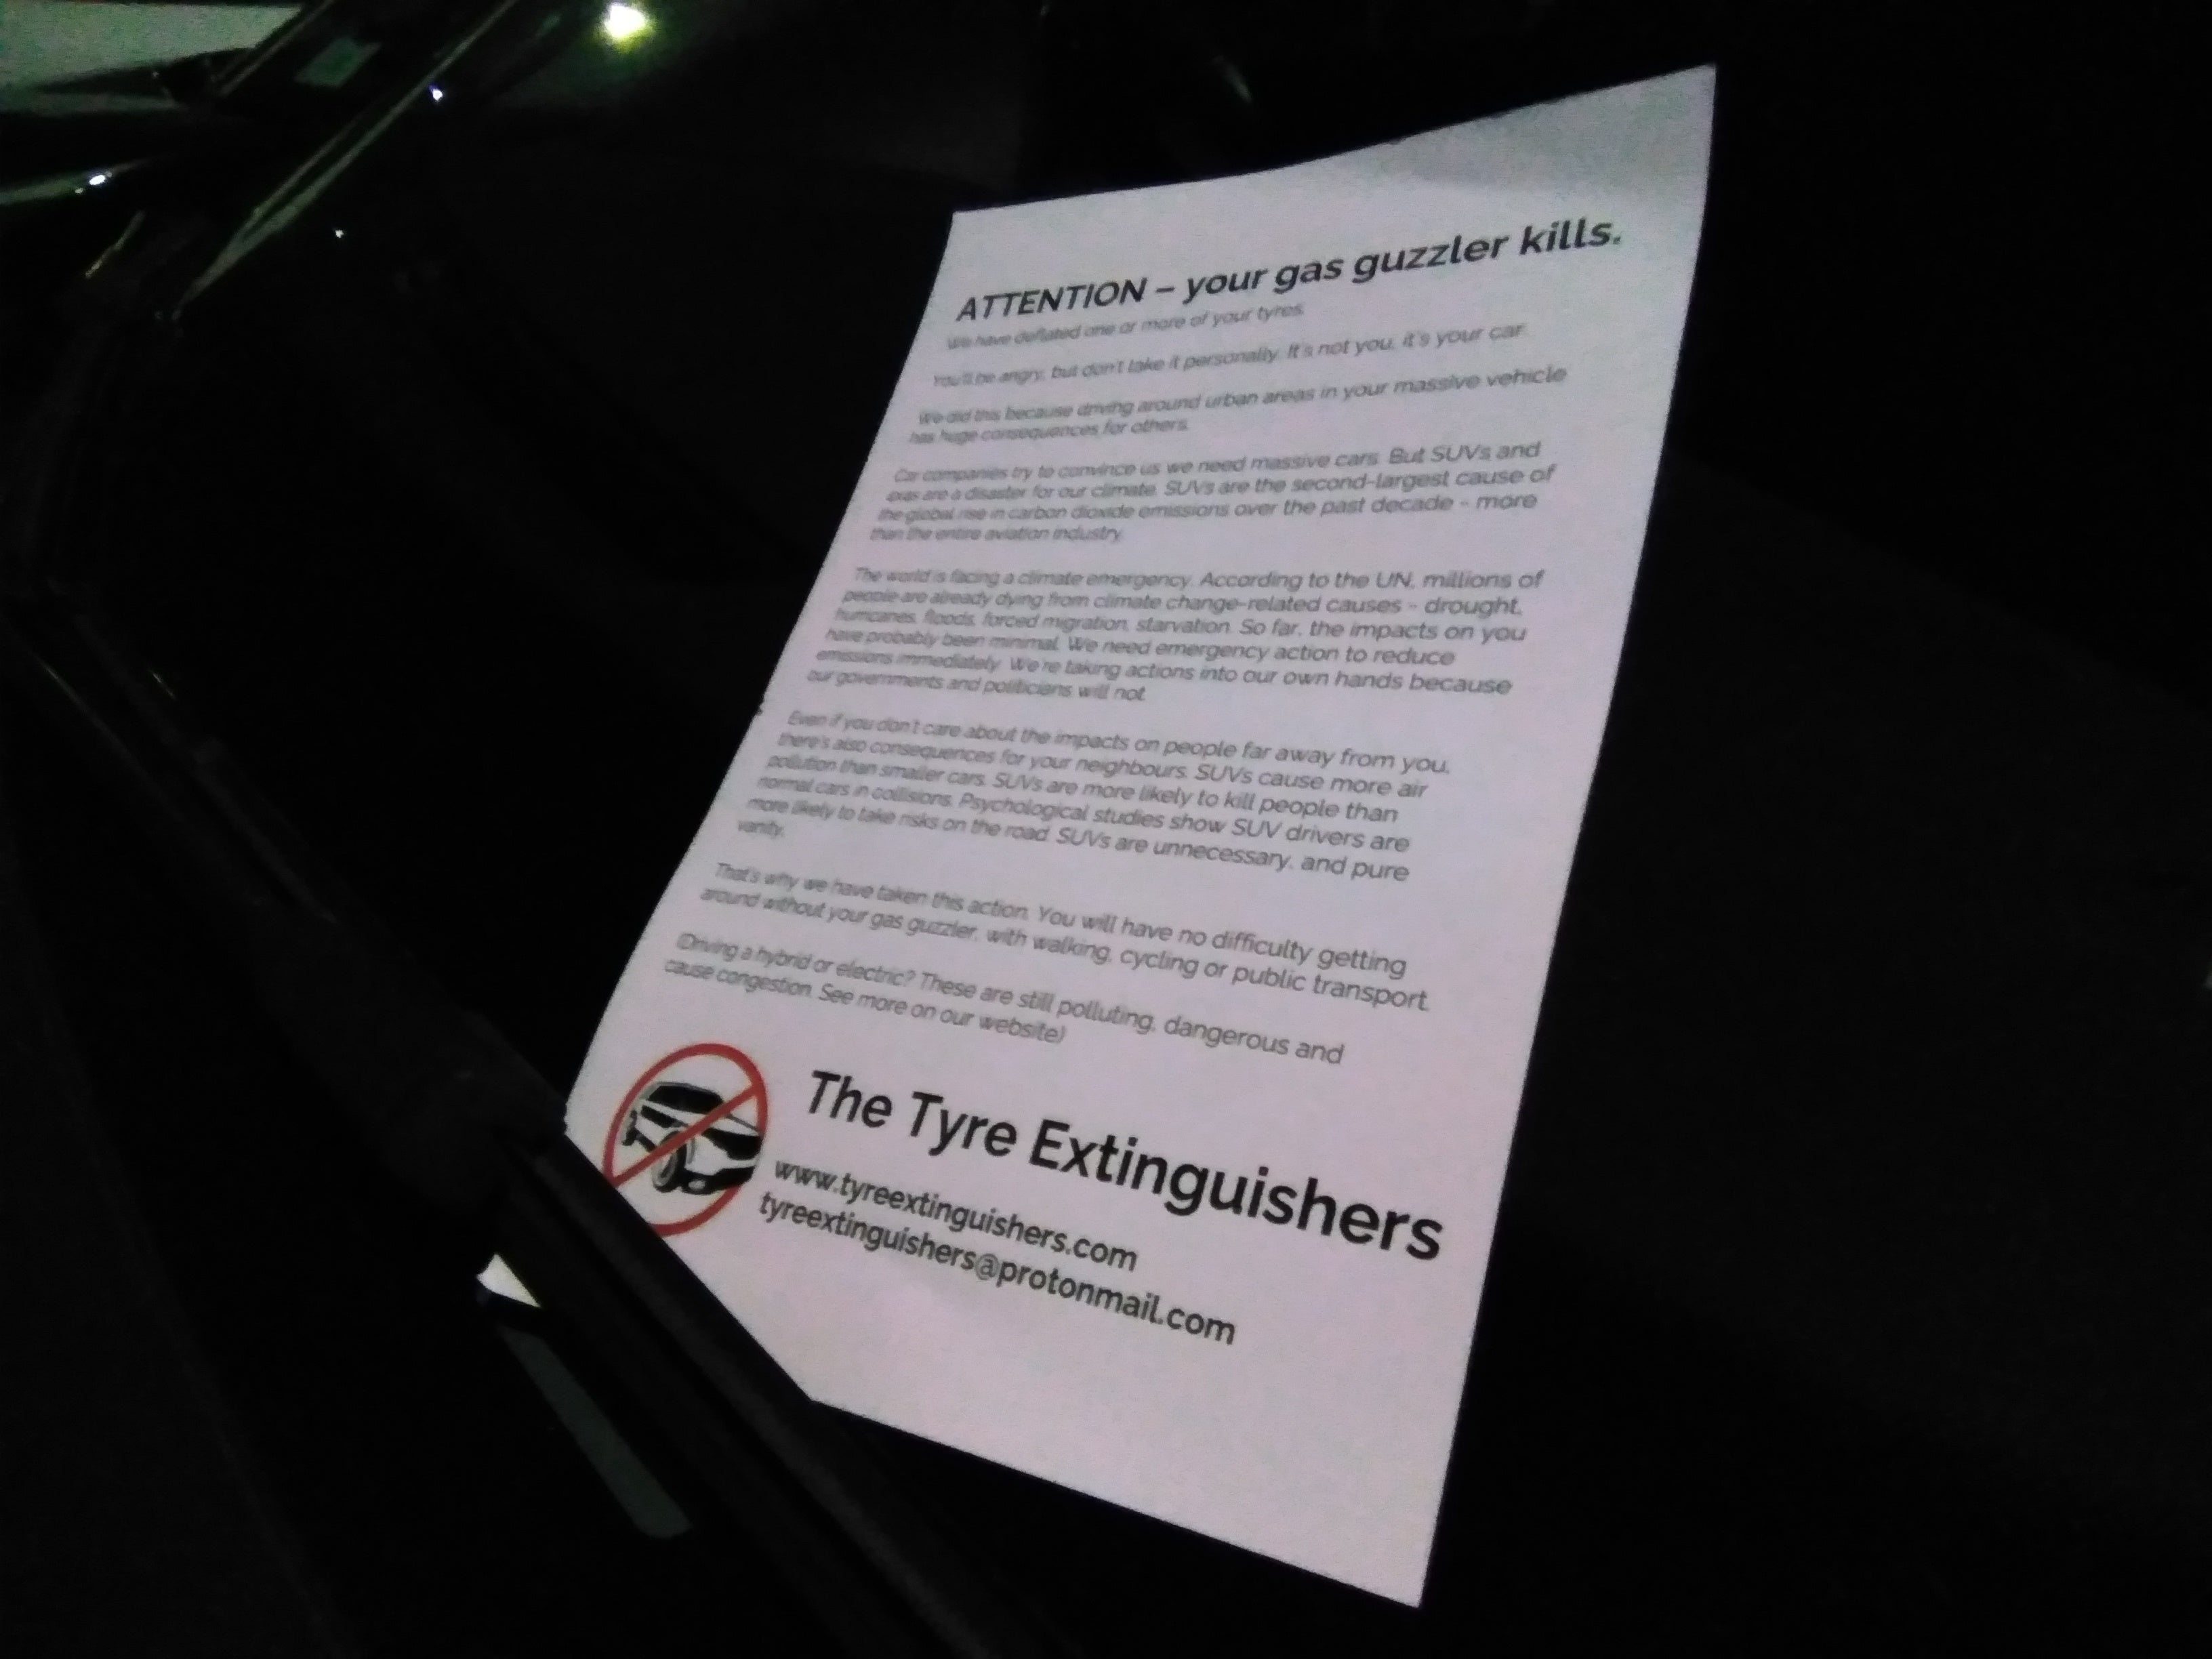 A letter the group leaves on the luxury vehicles they target